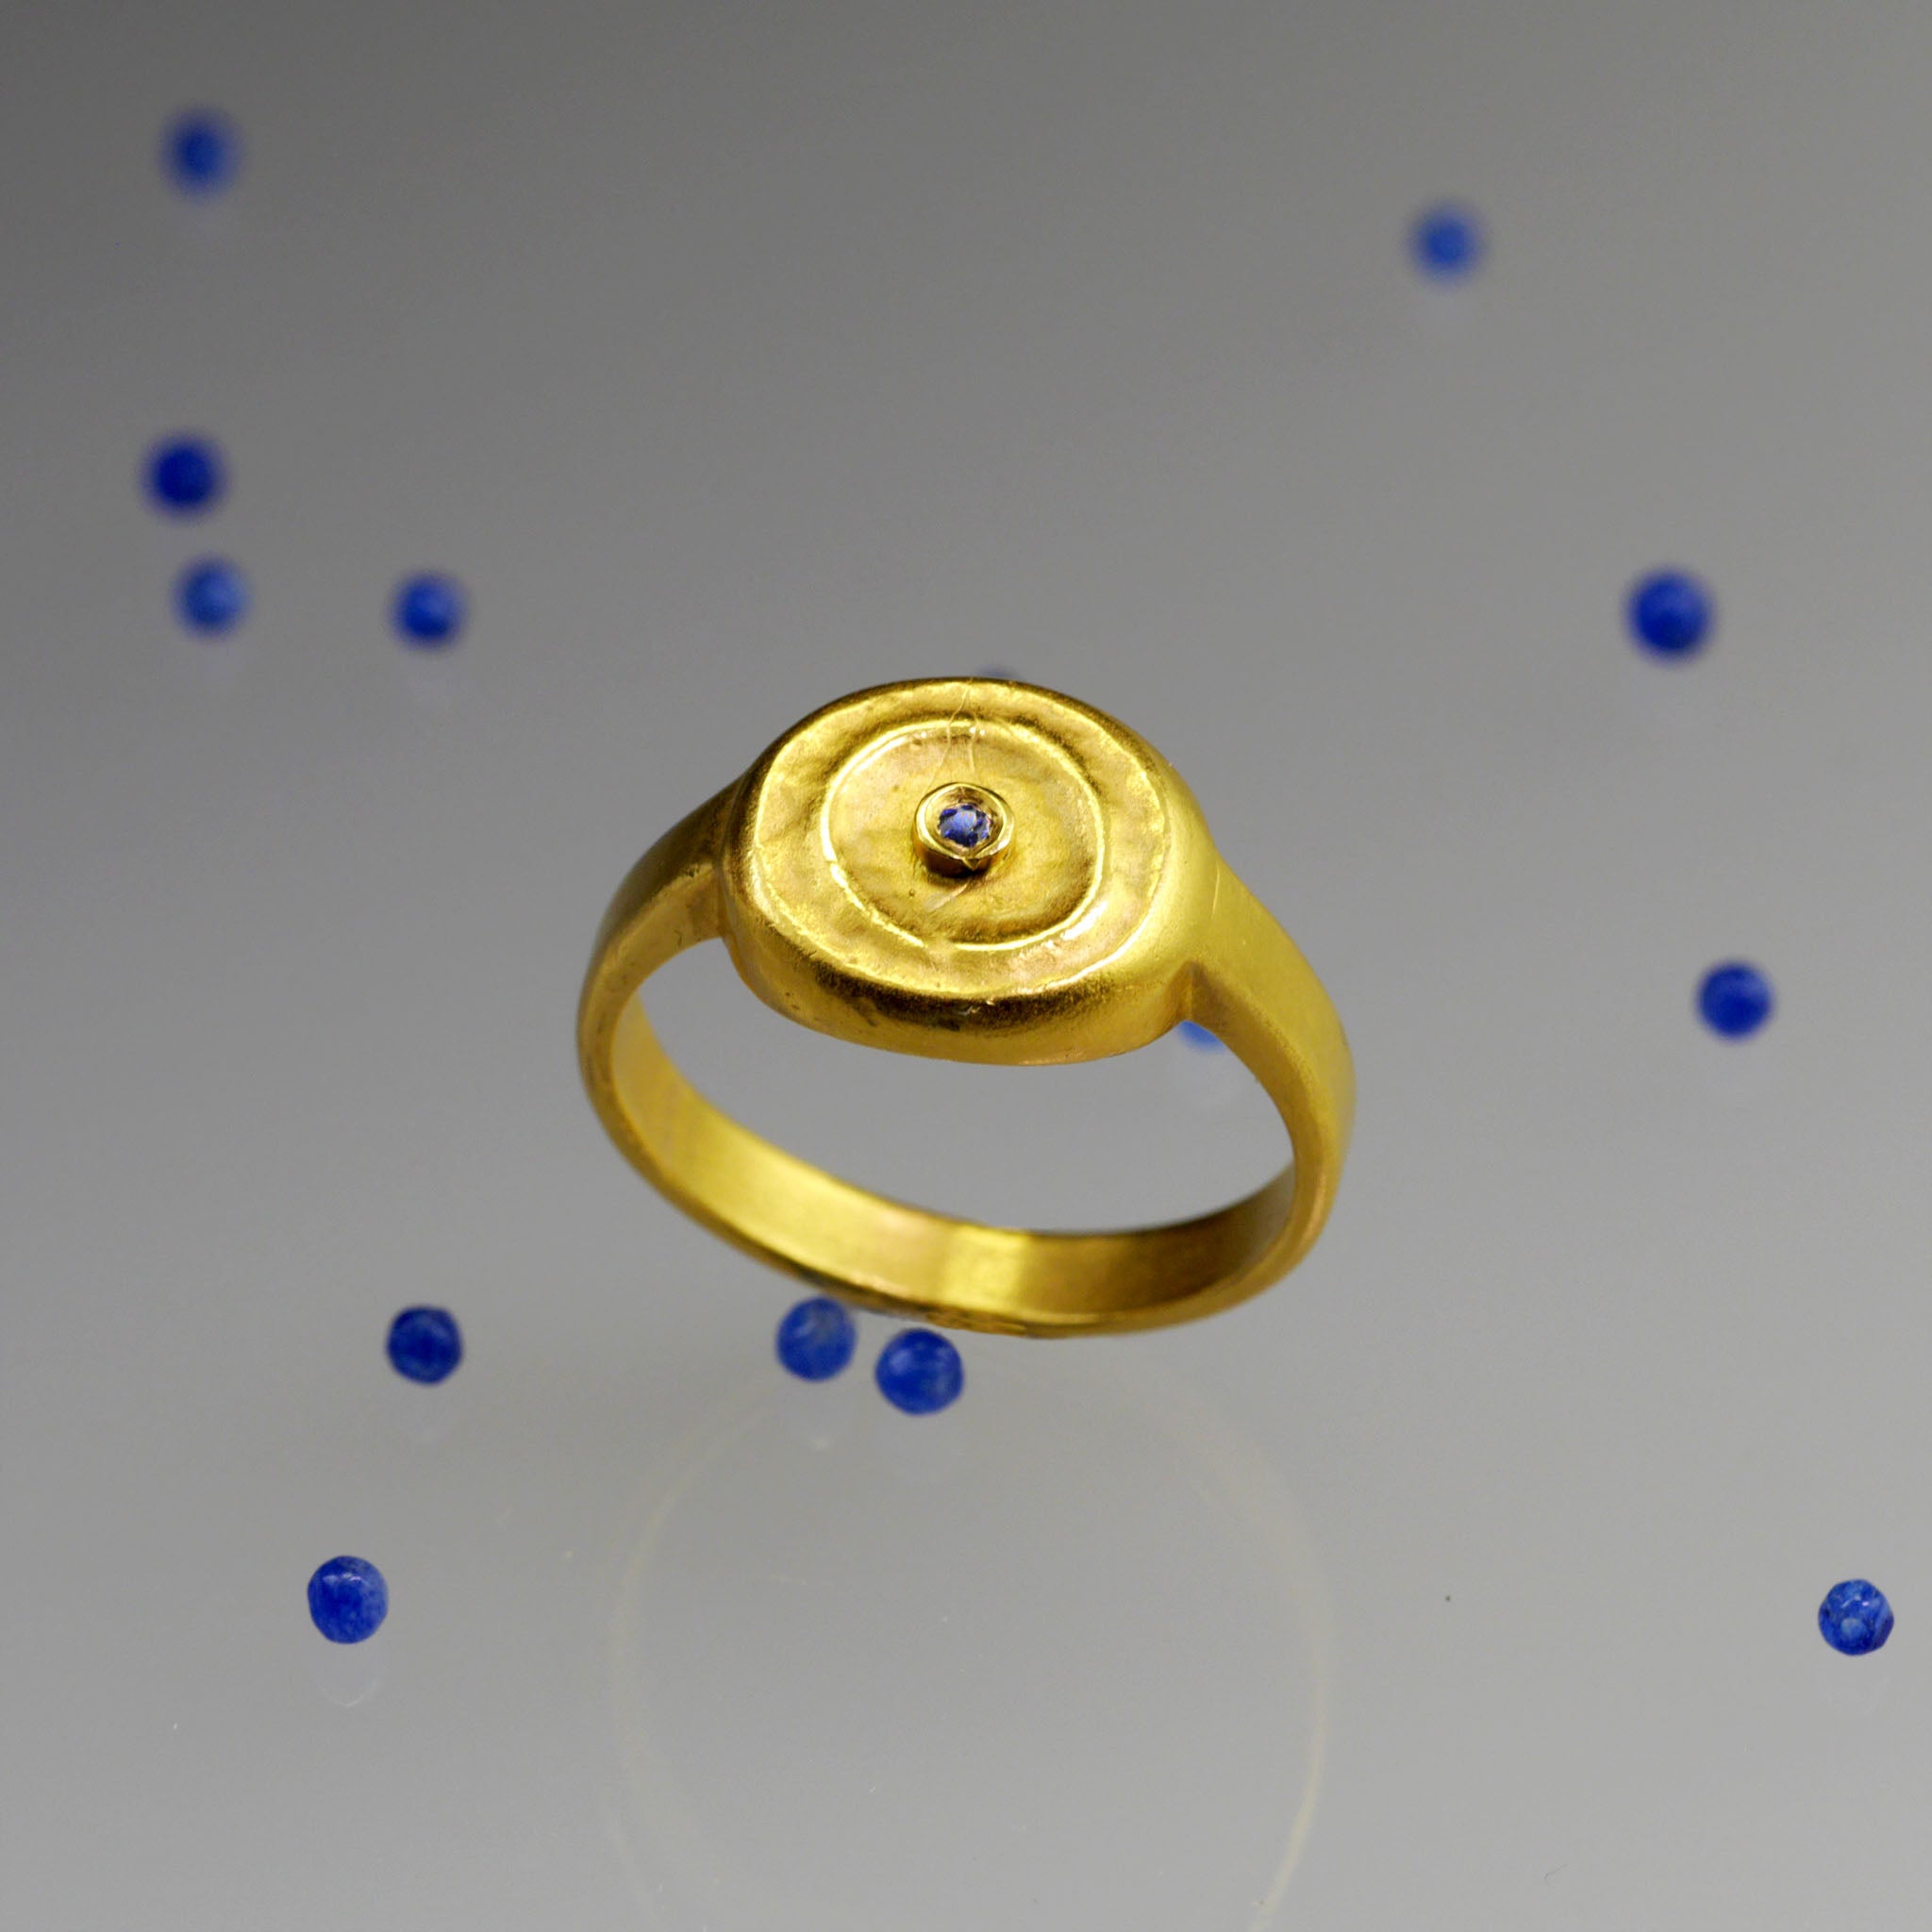 Top view of Handmade 18k Gold ring with a central Sapphire and tiny Sapphire beads scattered around it, exuding vintage charm reminiscent of the Egyptian pharaohs' era.